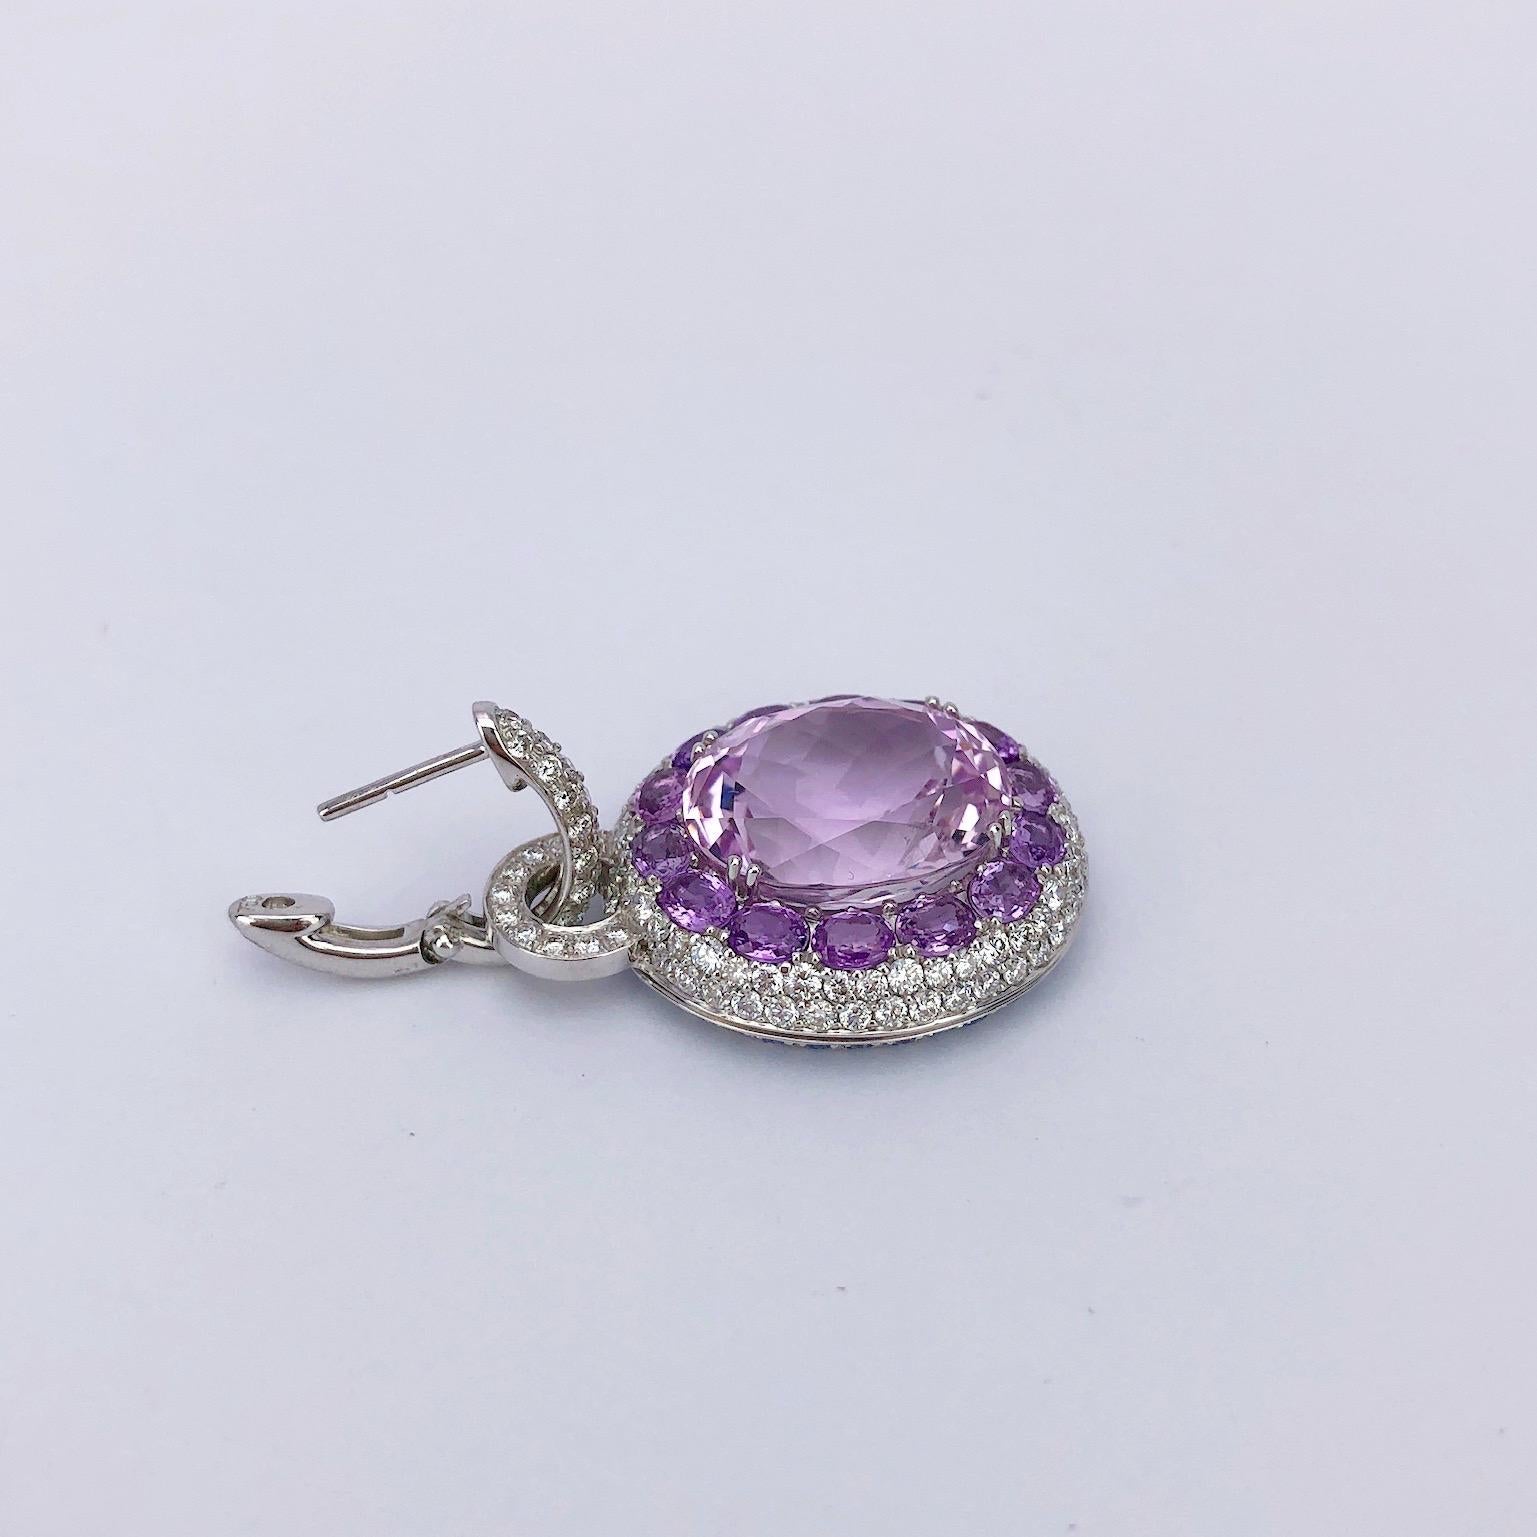 Cellini 18KT Gold, 22.61Ct. Kunzite, 4.65Ct. Sapphire & 3.07Ct. Diamond Earrings In New Condition For Sale In New York, NY